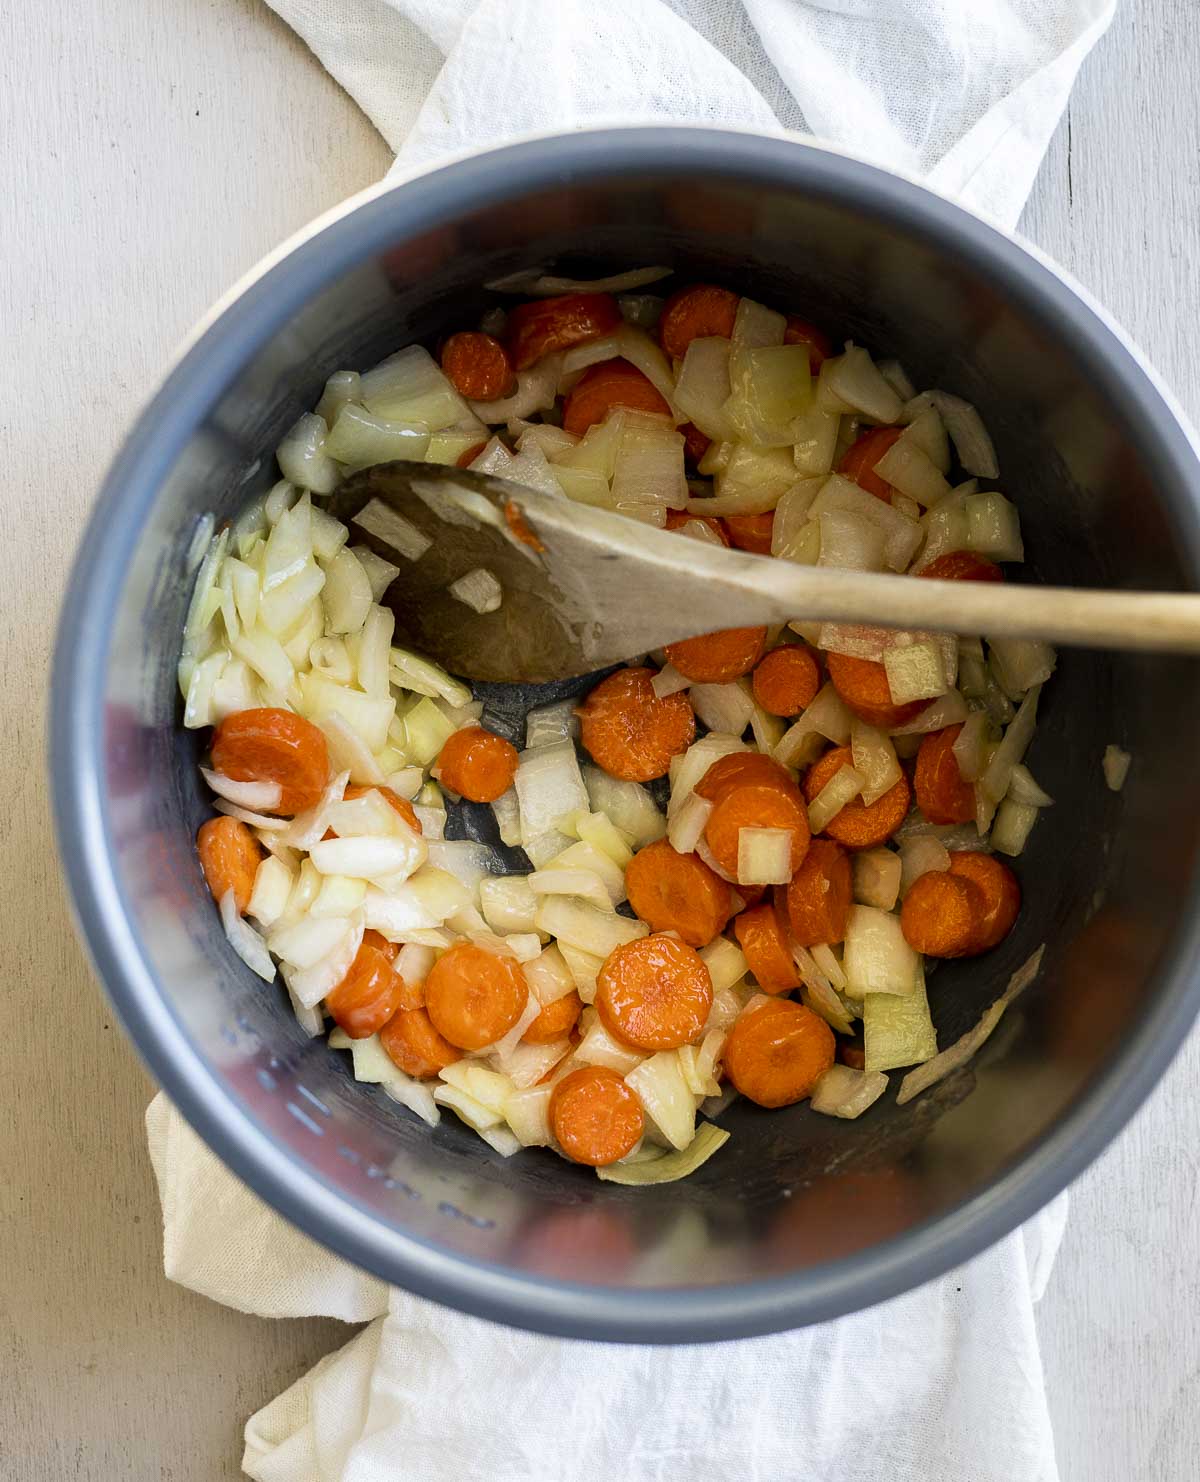 Chopped veggies for the pot pie in an Instant Pot insert with a wooden spoon.